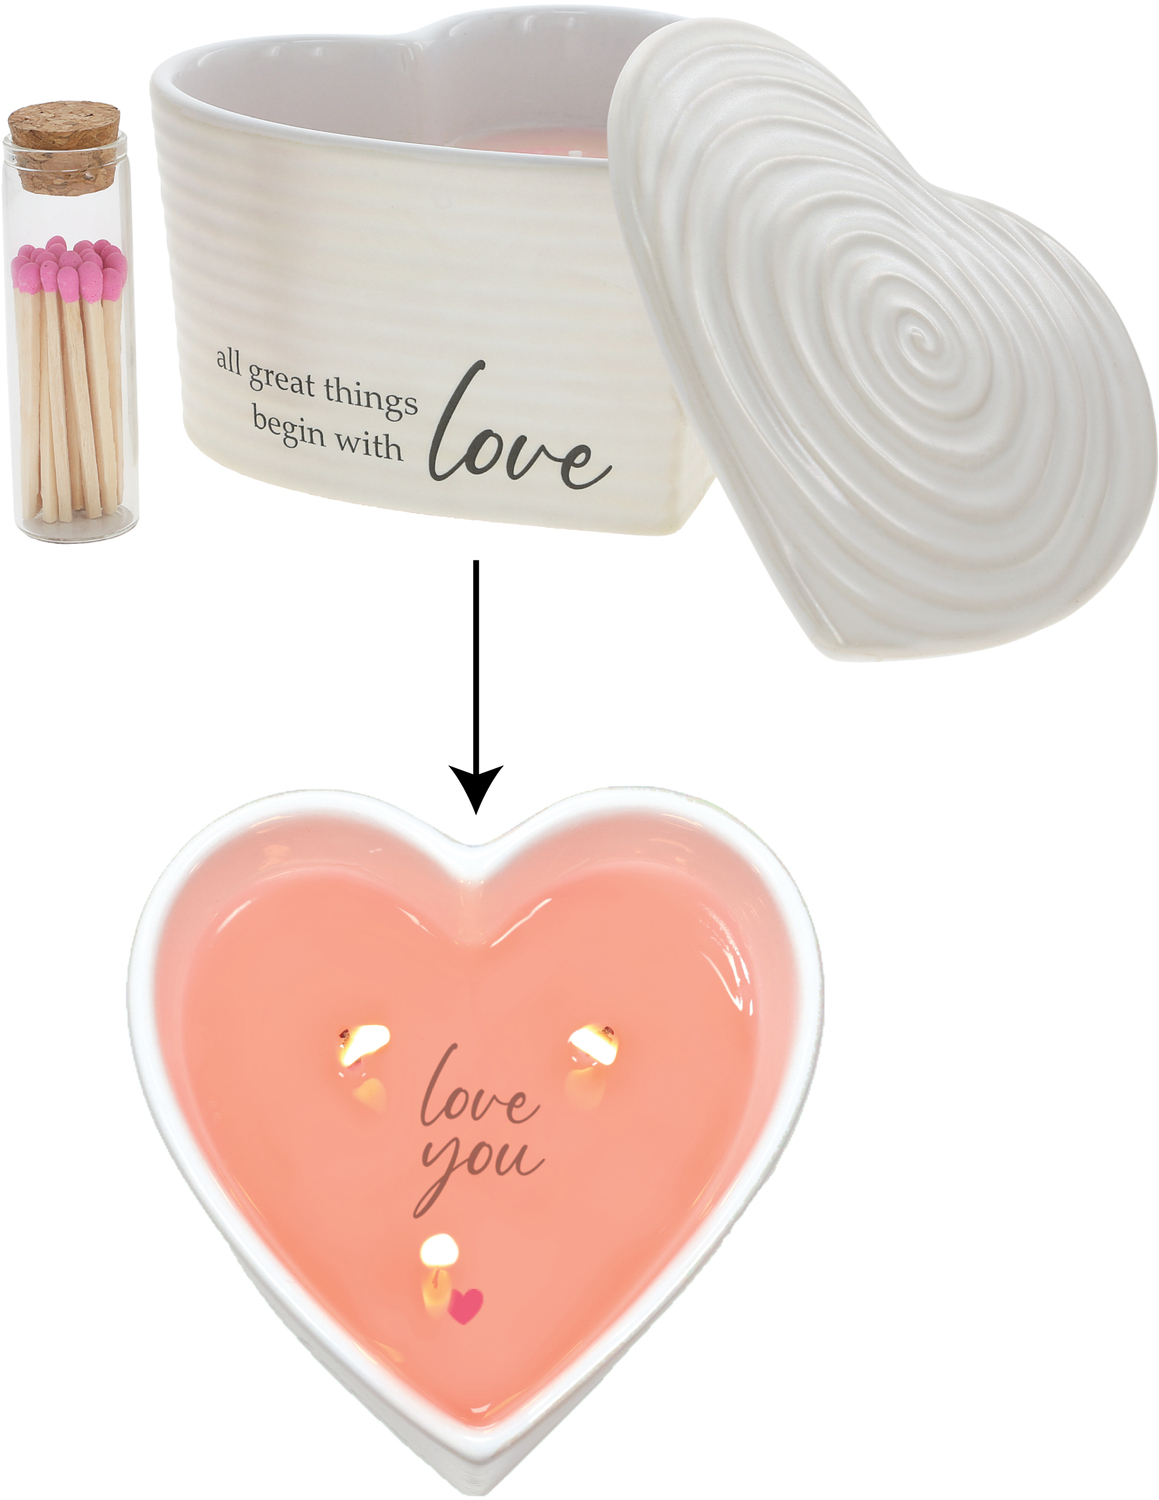 Love by Thoughts of Home - Love - 8 oz - 100% Soy Wax Reveal Triple Wick Candle with Matches
Scent: Vanilla